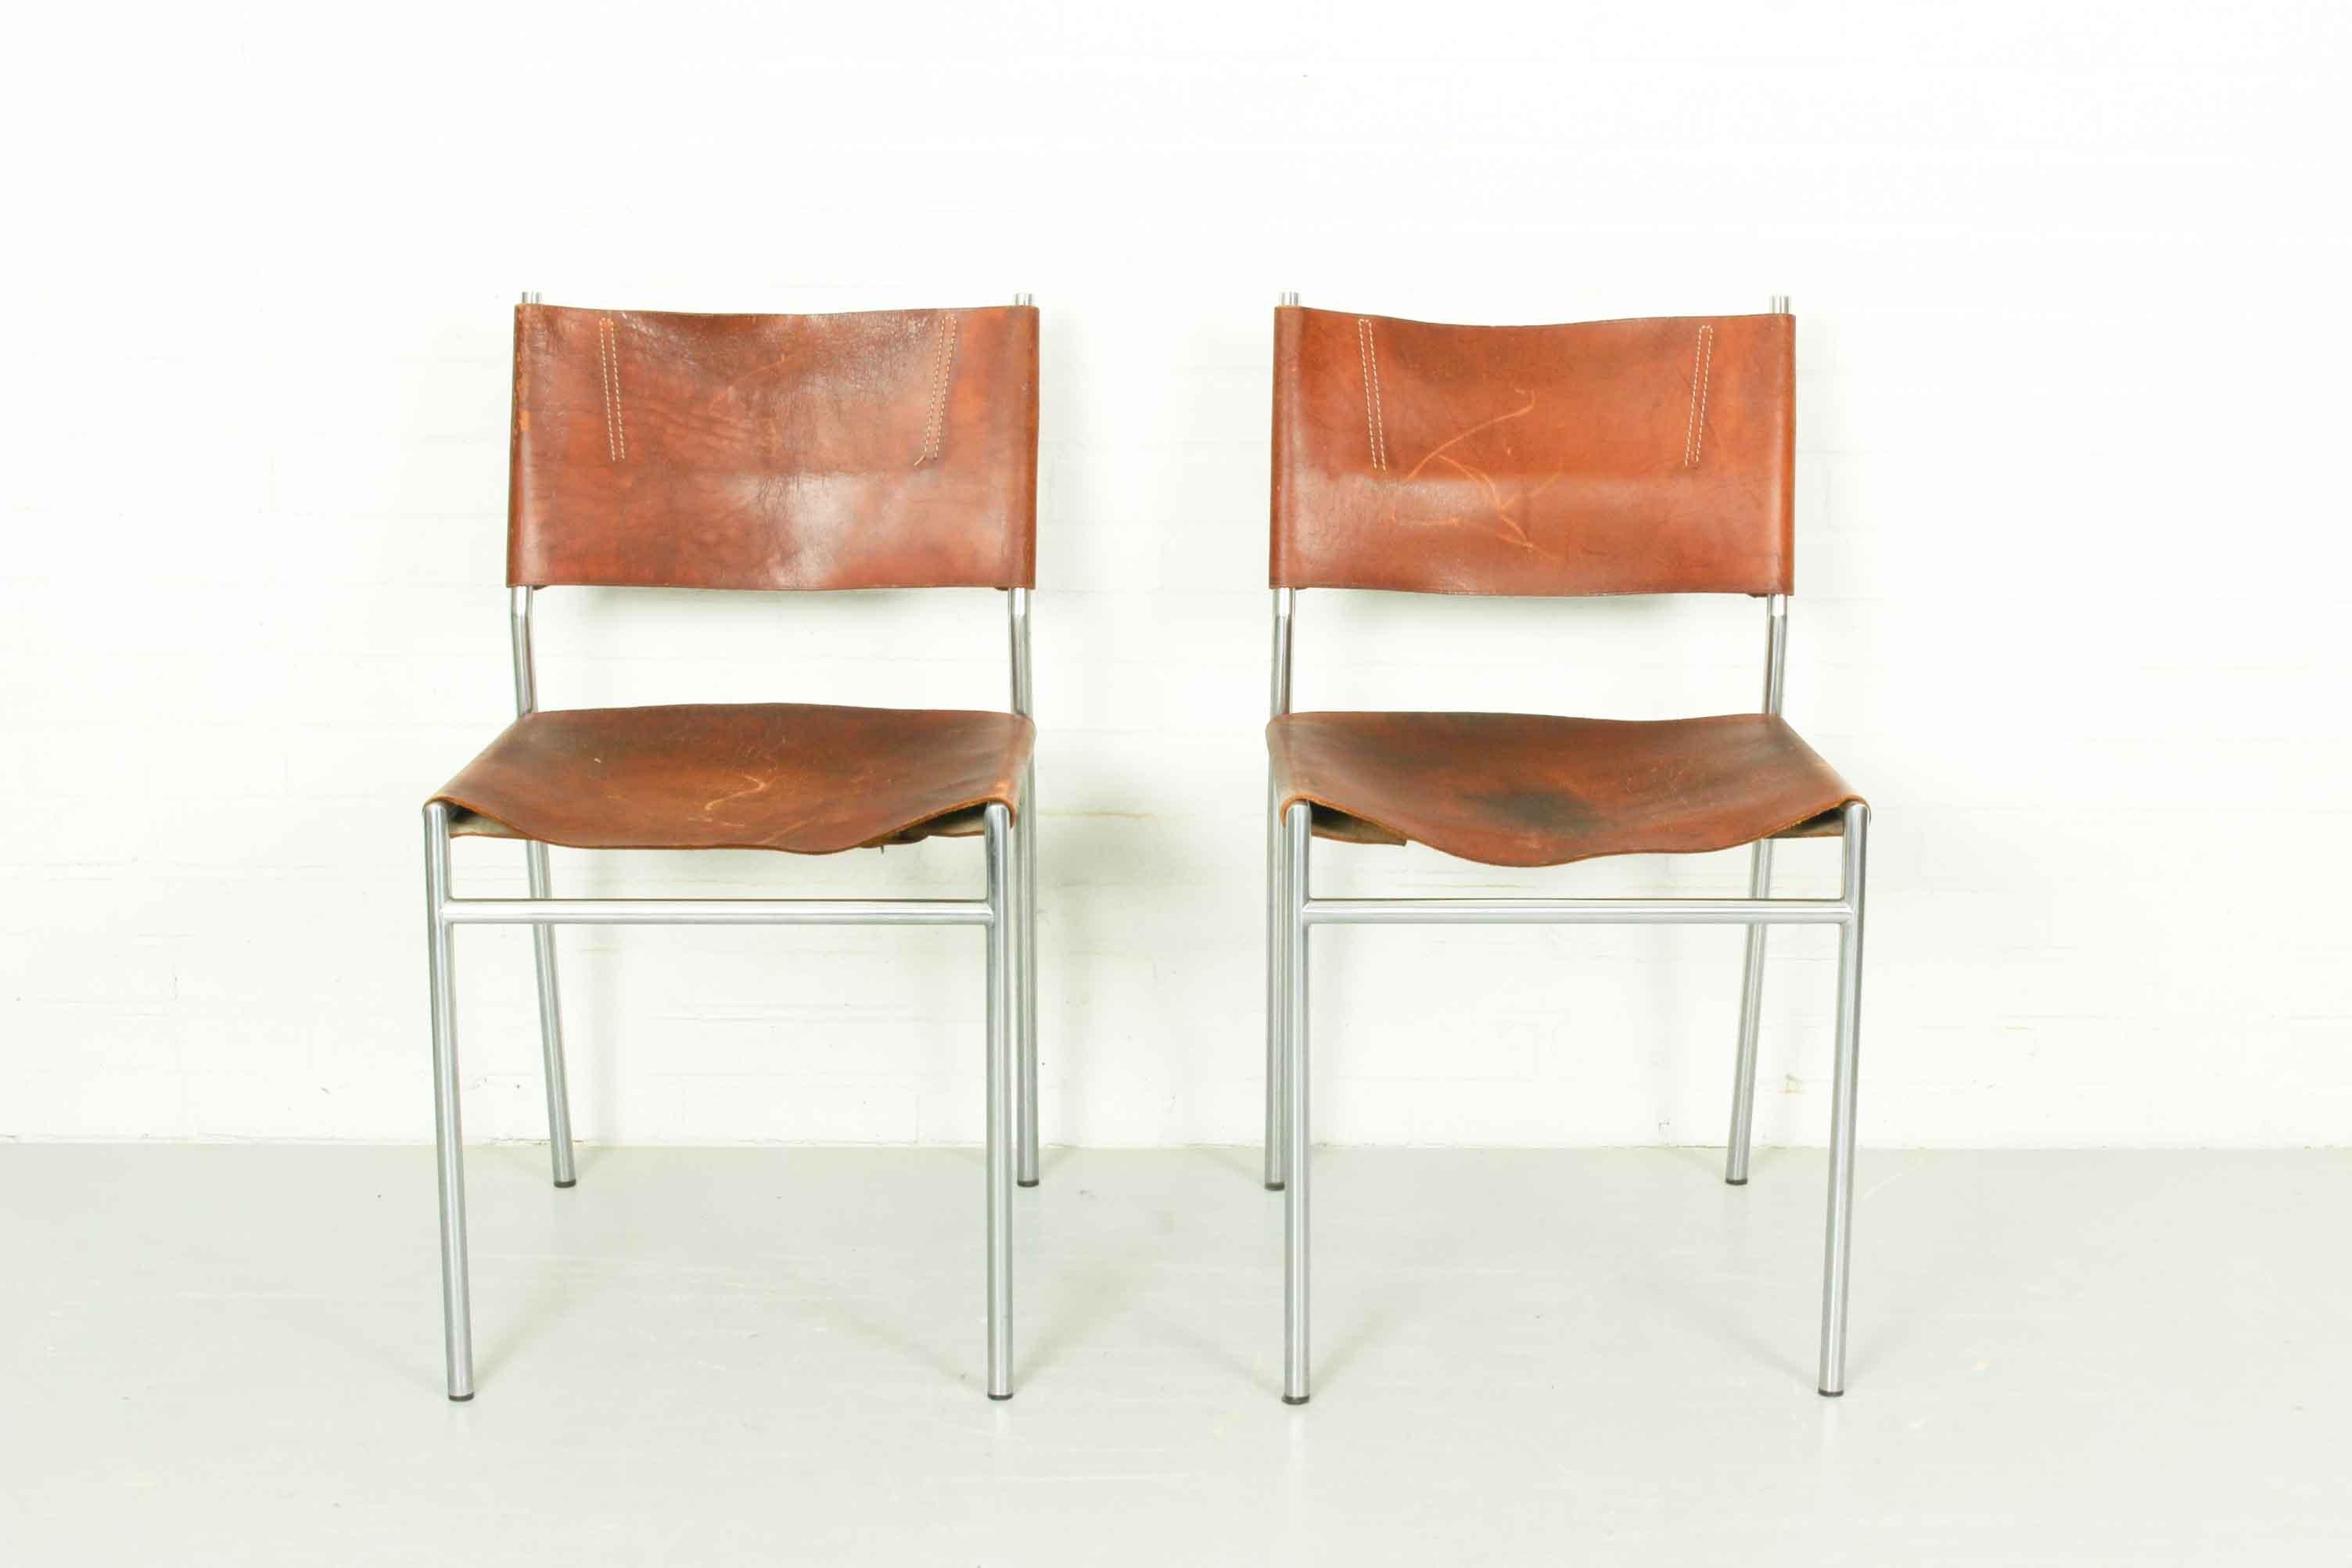 Minimalist Mid-Century Modern SE06 dining chair designed by Martin Visser and manufactured by ‘t Spectrum, Netherlands 1967. These early versions of the SE06 chairs have a stainless steel tubular metal frame and very nice thick saddle leather seat